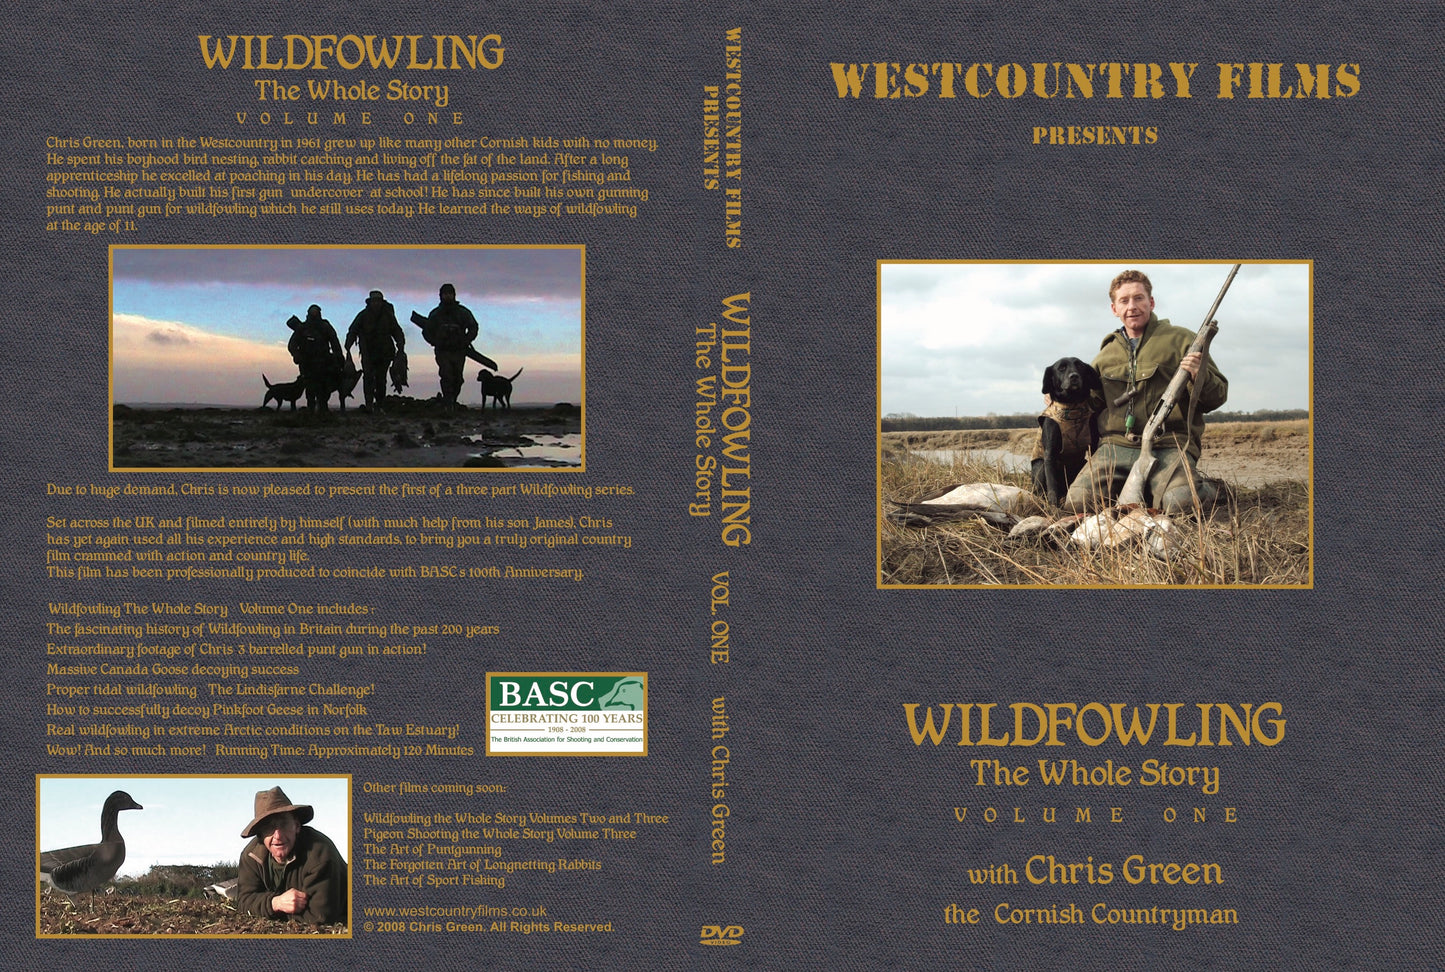 Wildfowling The Whole Story – Volume One